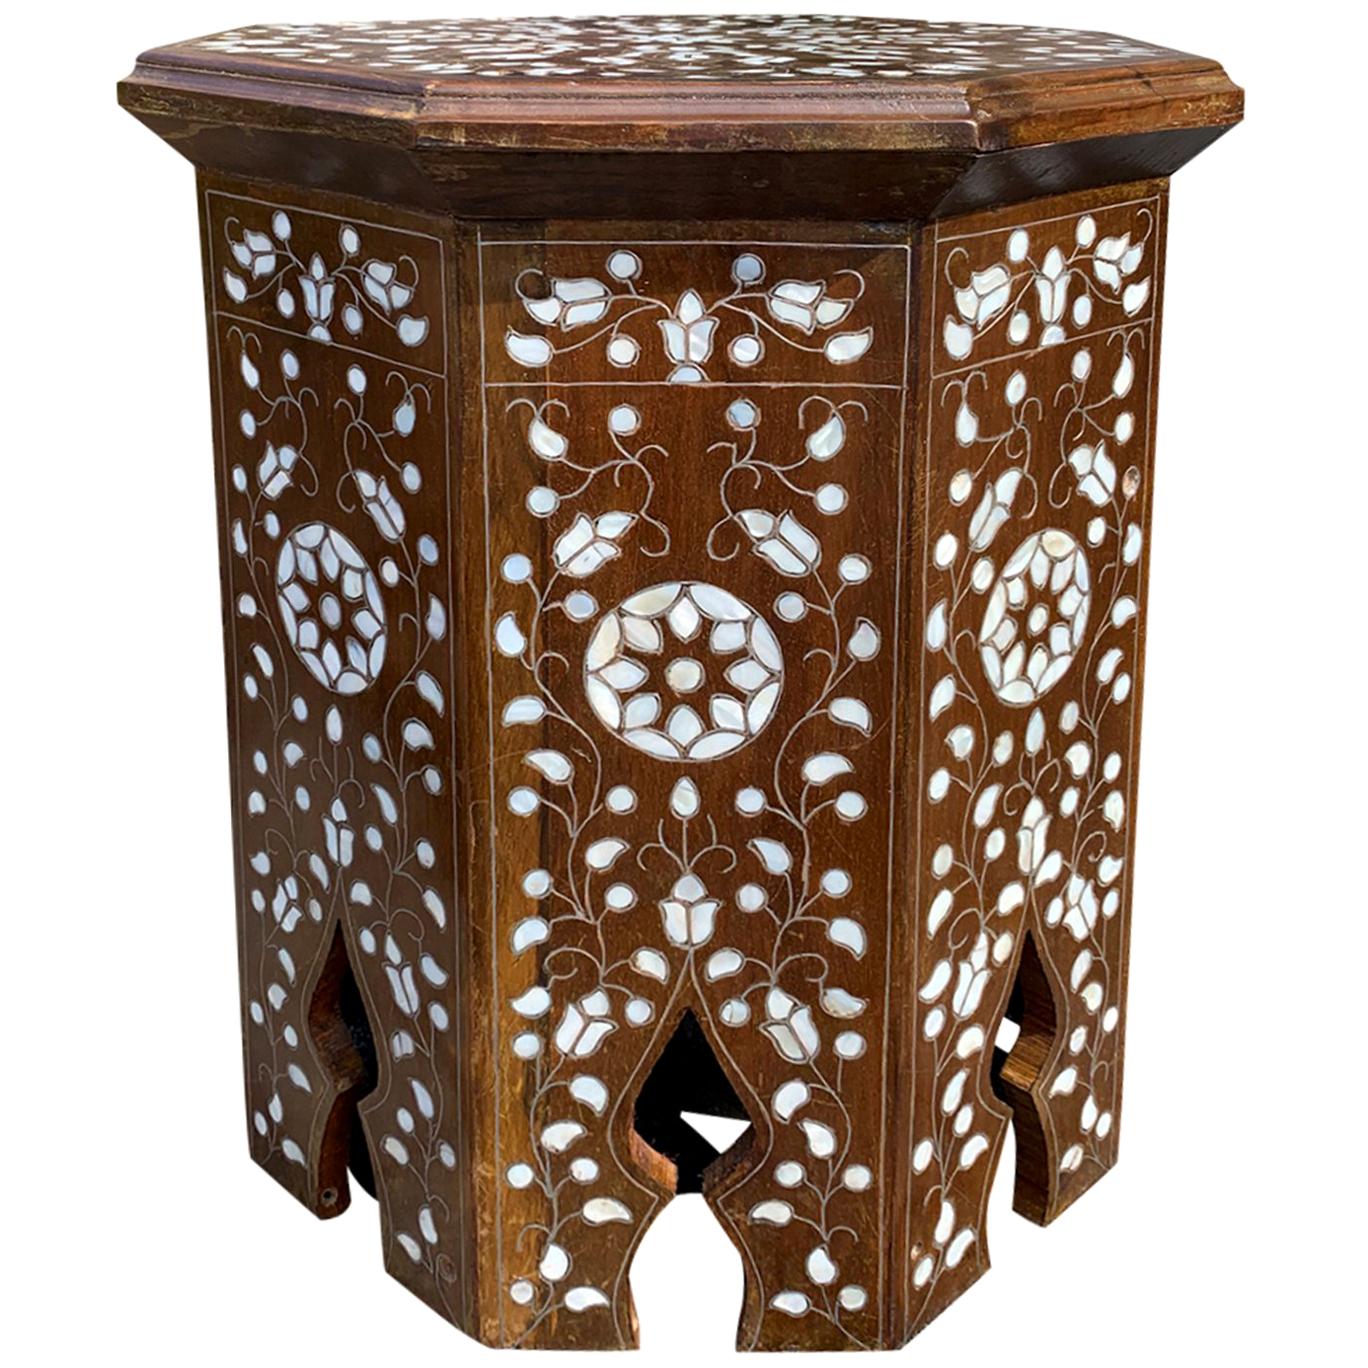 20th Century Moroccan Style Inlaid Drinks Table